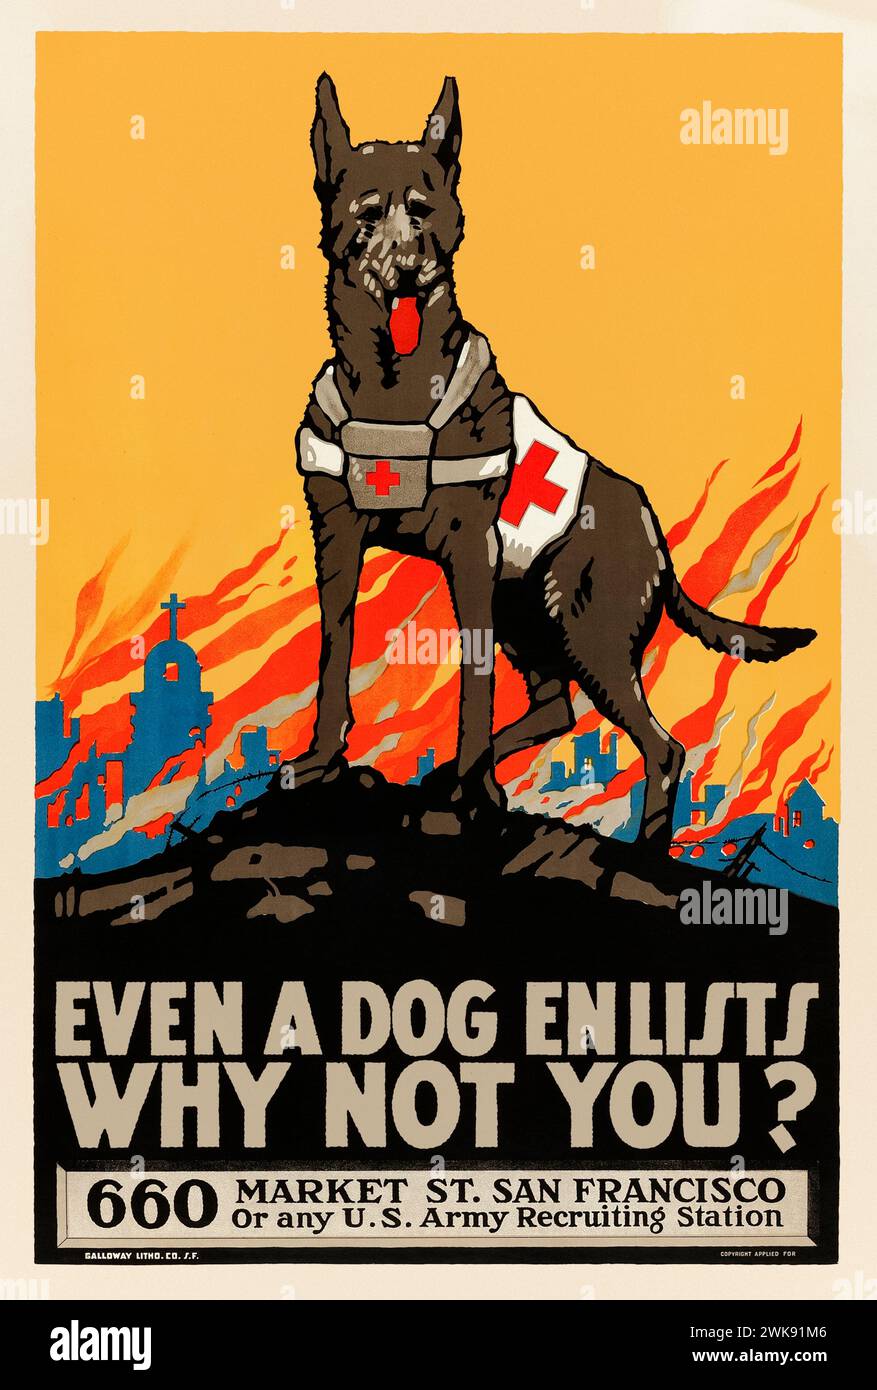 Even a dog enlists, why not you? 1917-18 US Army recruiting poster featuring artwork by Mildred Moody showing a Red Cross rescue dog with a city on fire in the background. Stock Photo